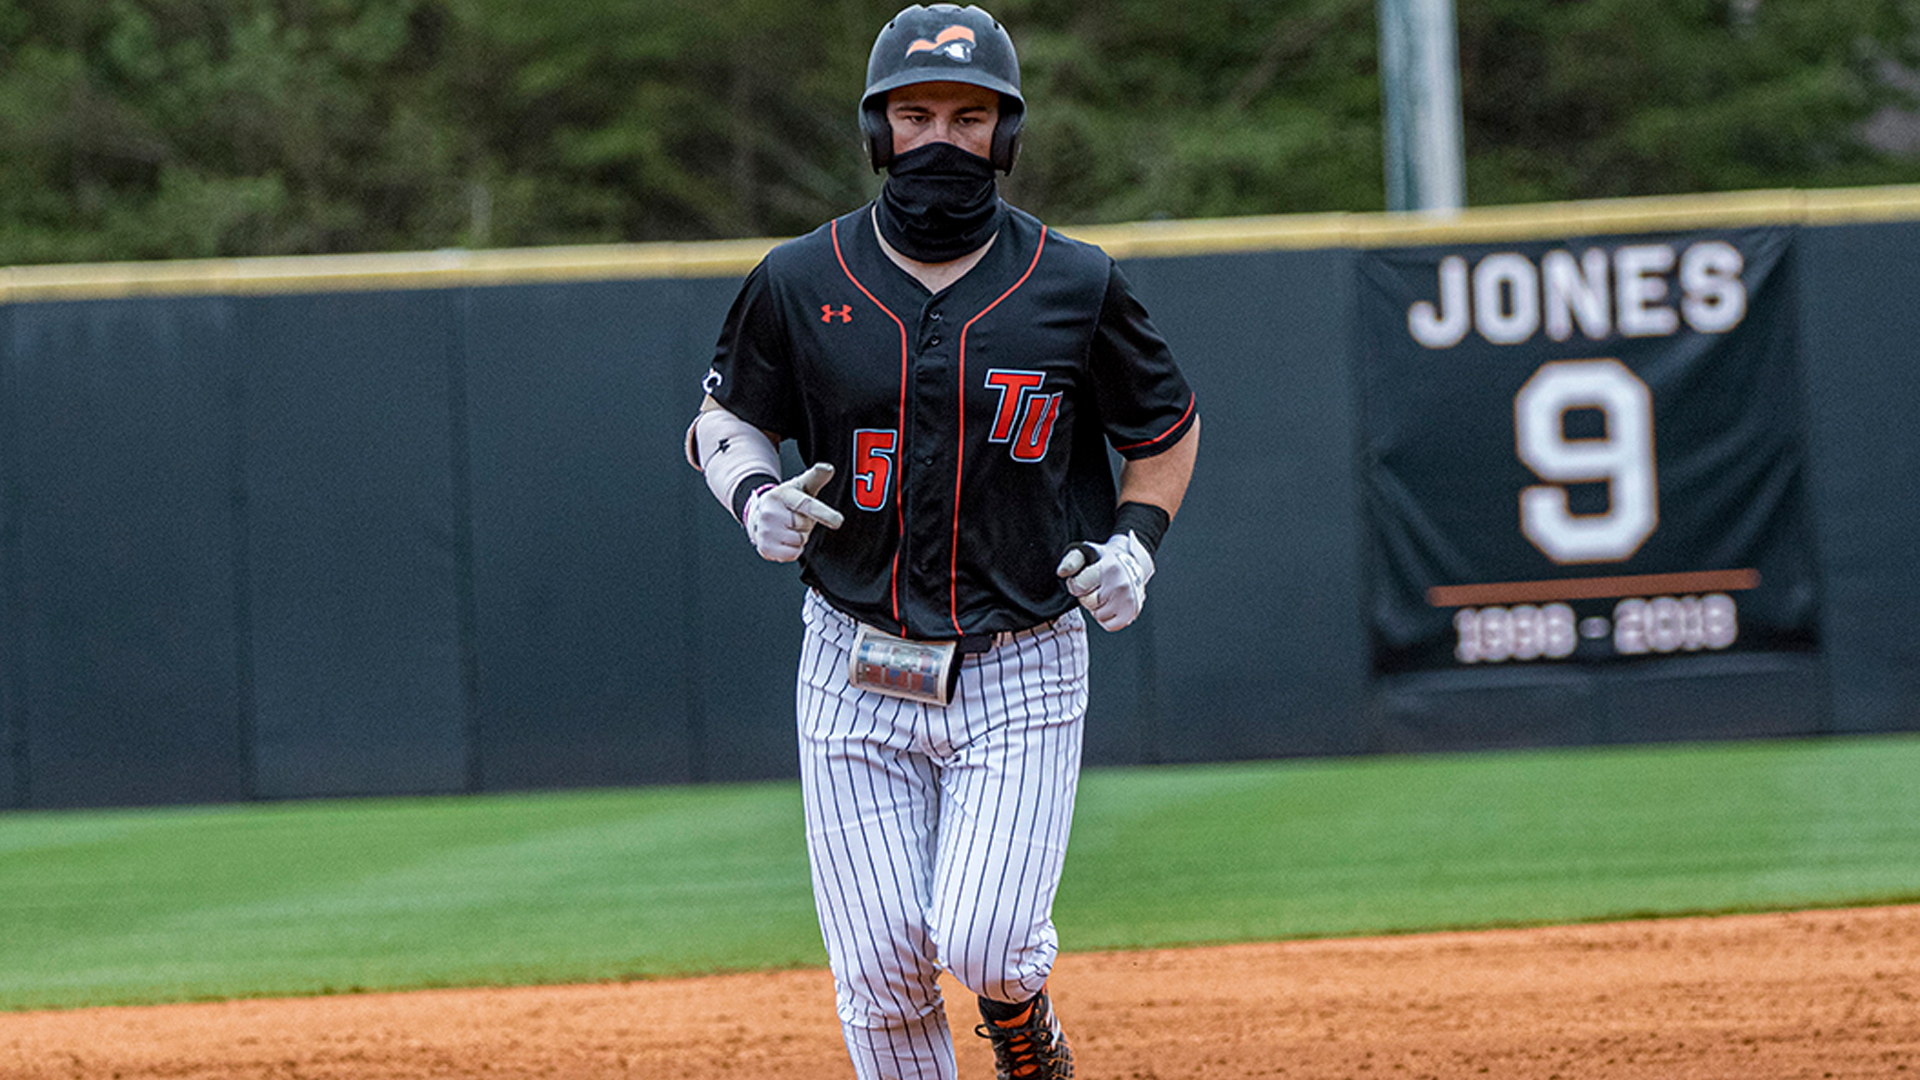 Tusculum's Daulton Martin belted two home runs while also becoming the program's all-time hits leader in Saturday's DH sweep of Queens (photo by Chuck Williams)